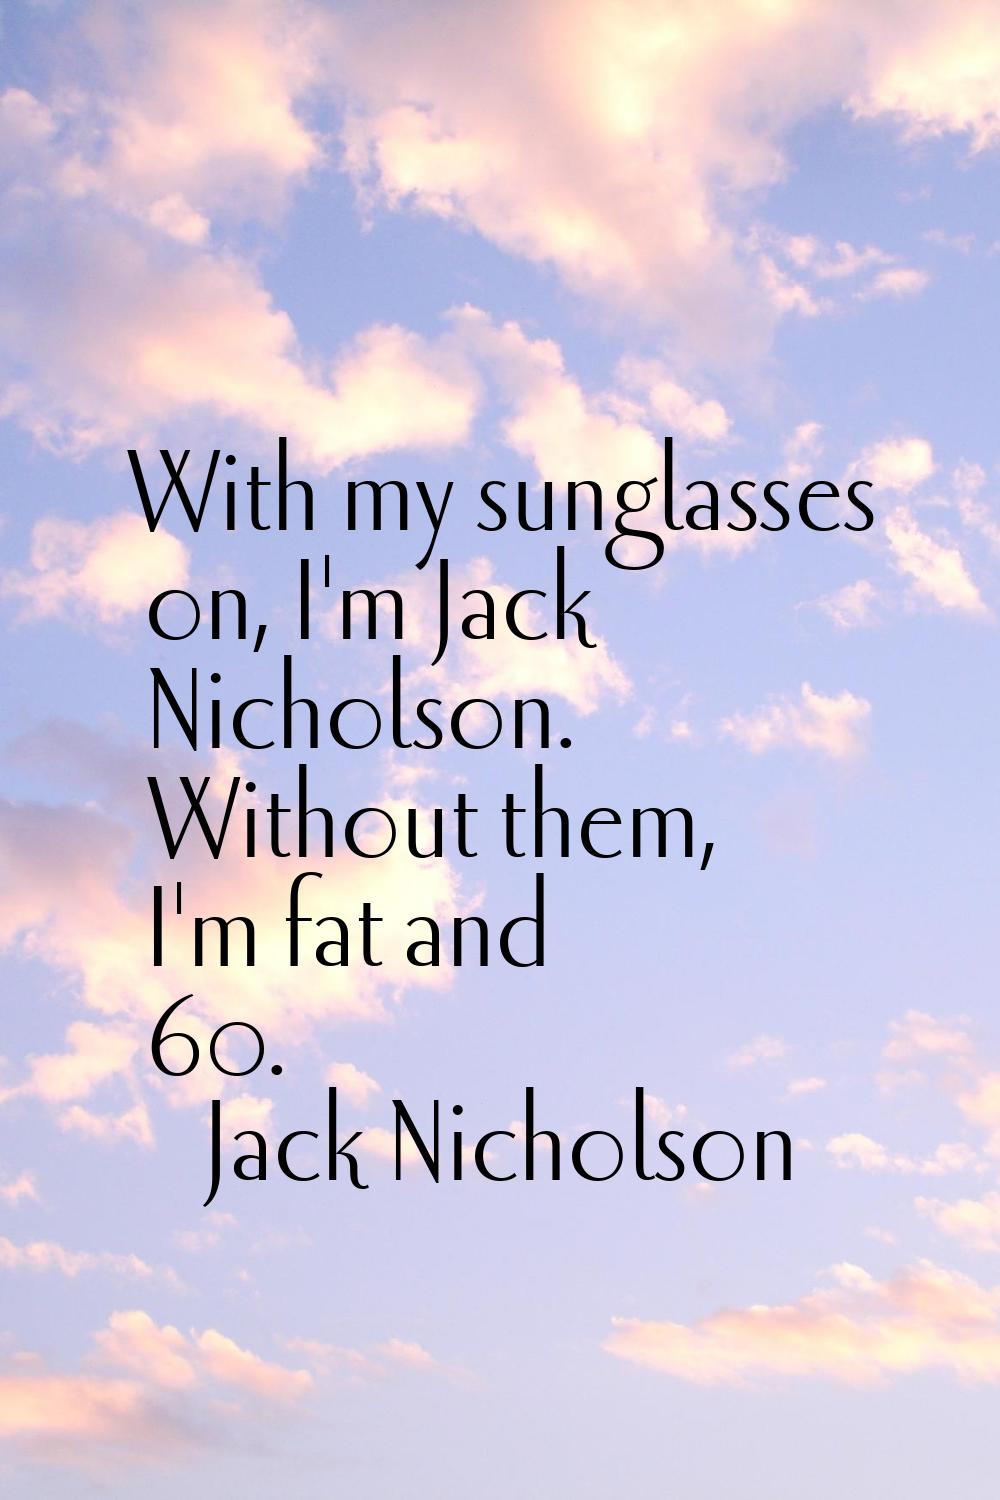 With my sunglasses on, I'm Jack Nicholson. Without them, I'm fat and 60.